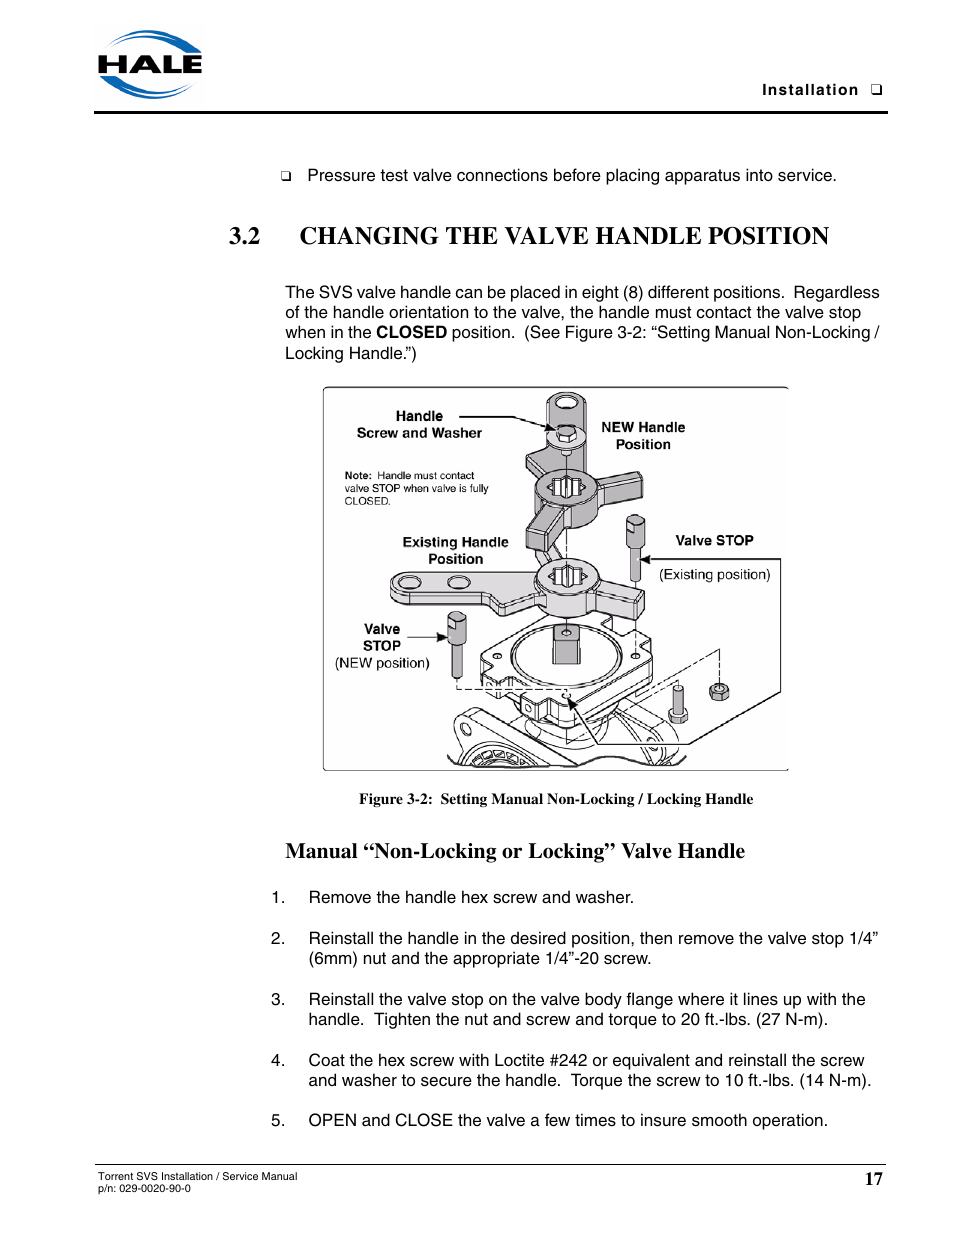 2 changing the valve handle position, Manual “non-locking or locking ...